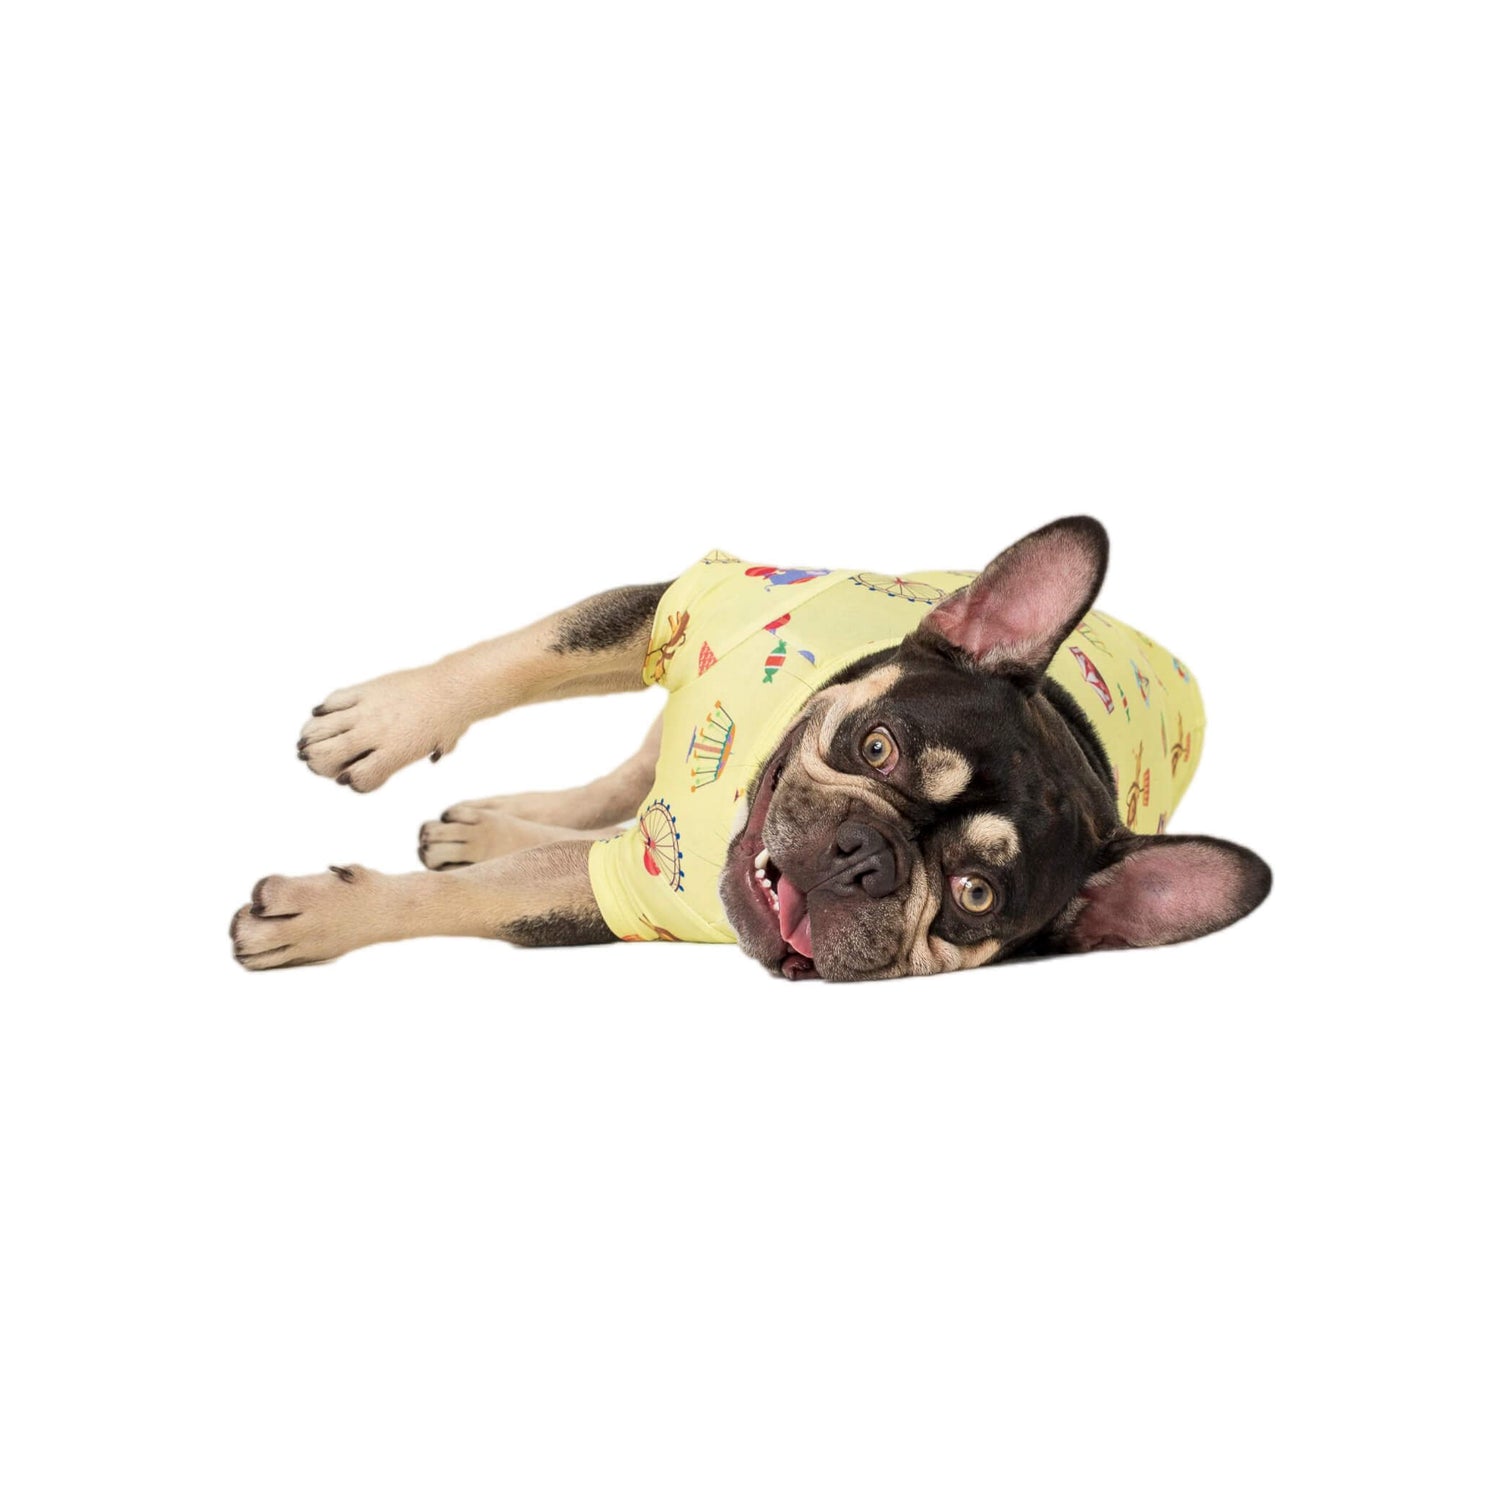 Fergus the French Bulldog aying down wearing a Vibrant Hound Admit one dog shirt. It has carnival theme printed on the dog clothing.